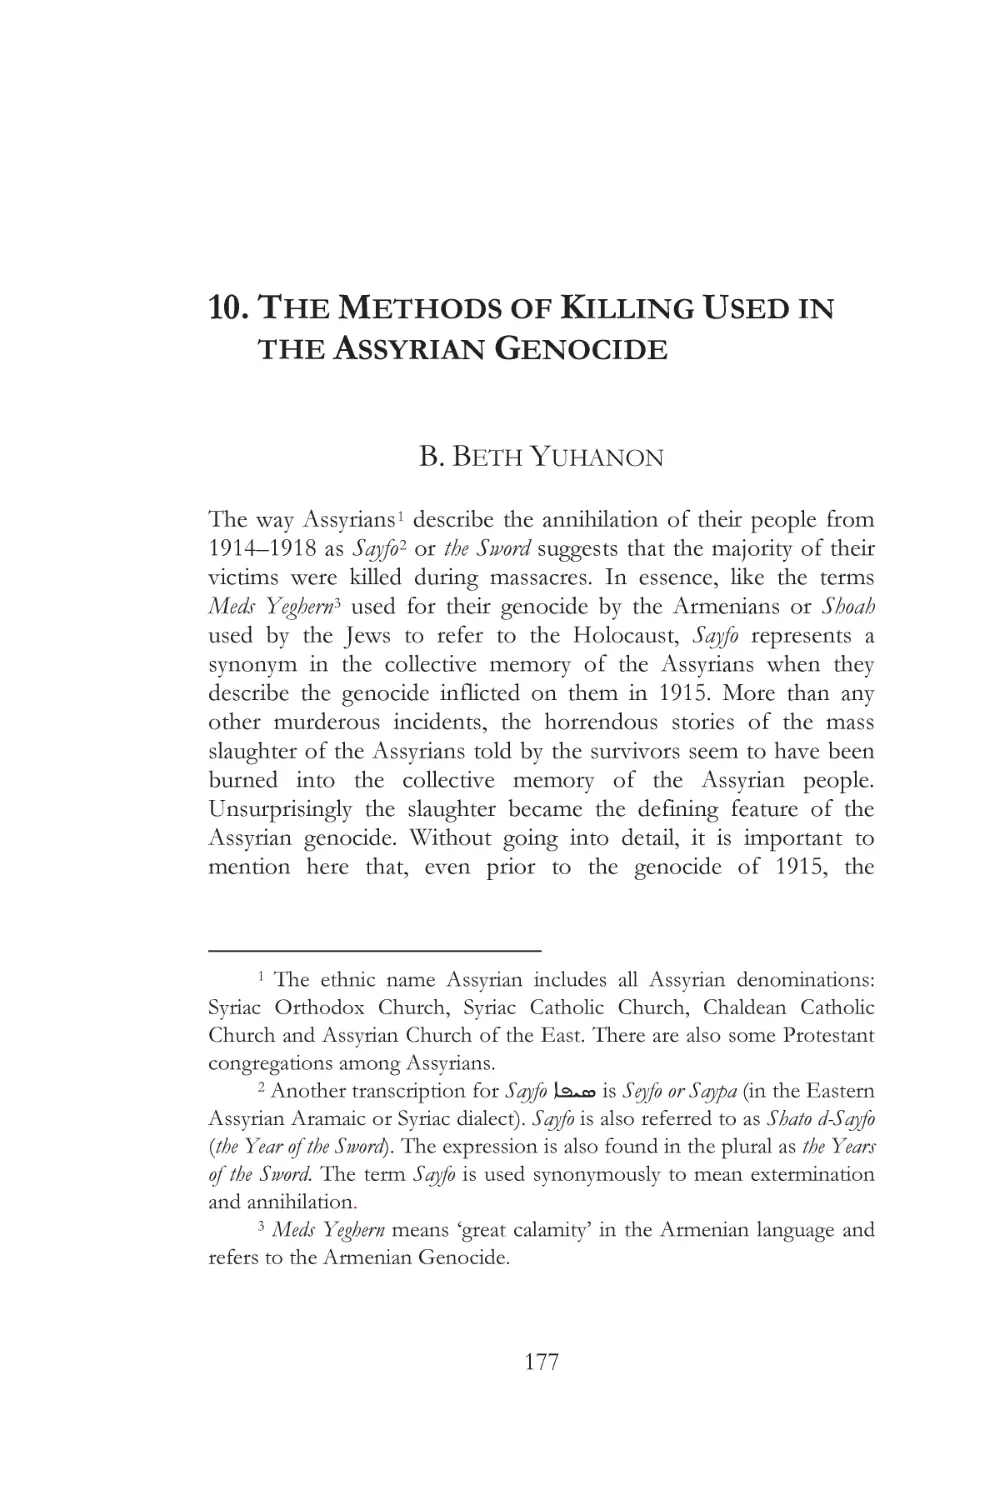 10. THE METHODS OF KILLING USED IN THE ASSYRIAN GENOCIDE